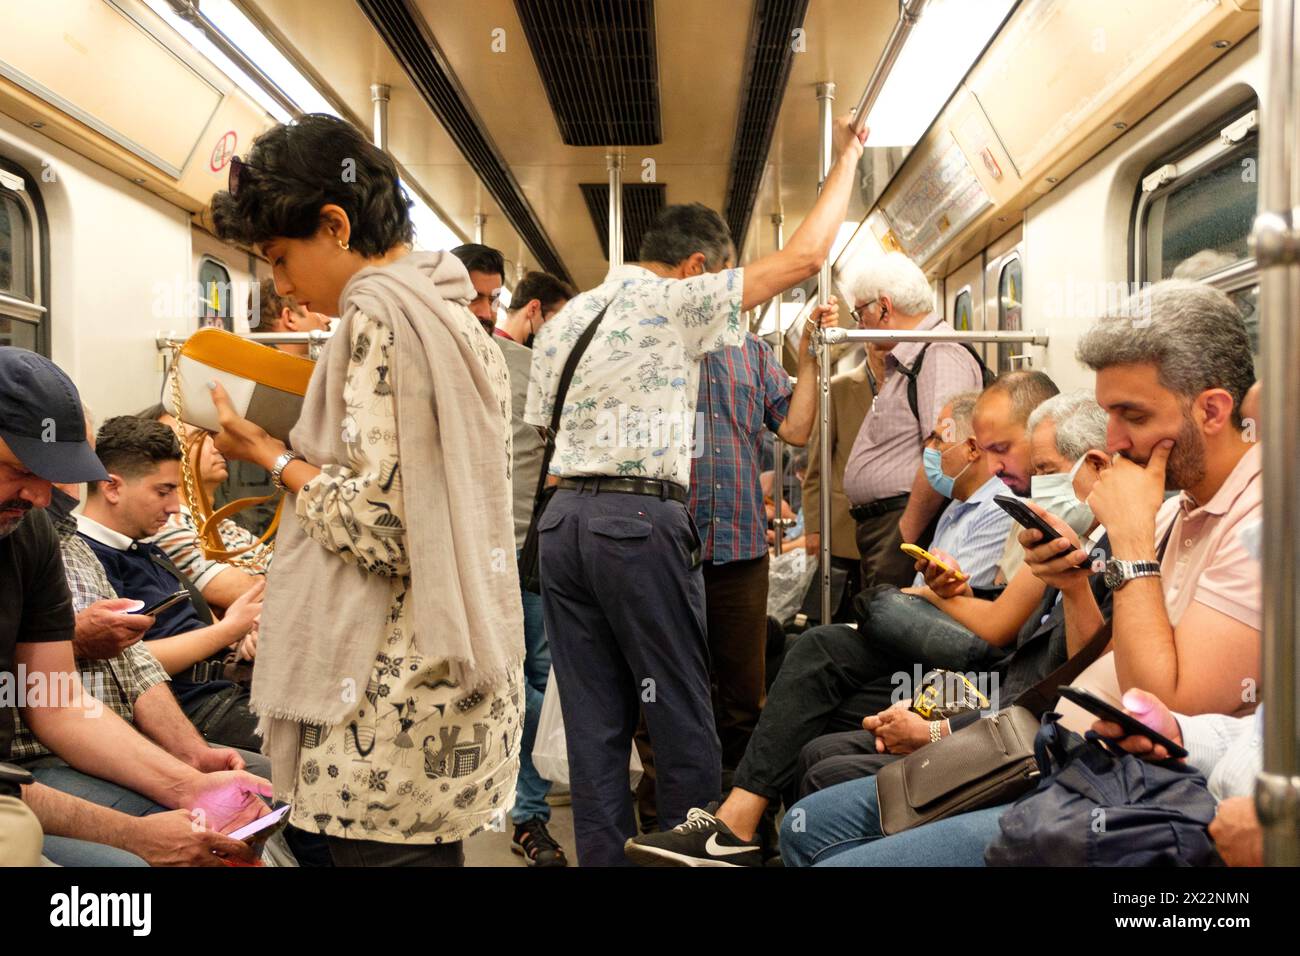 Iranian Girl on a subway train in Tehran resisting compulsory hijab by showing her hair in public. Stock Photo